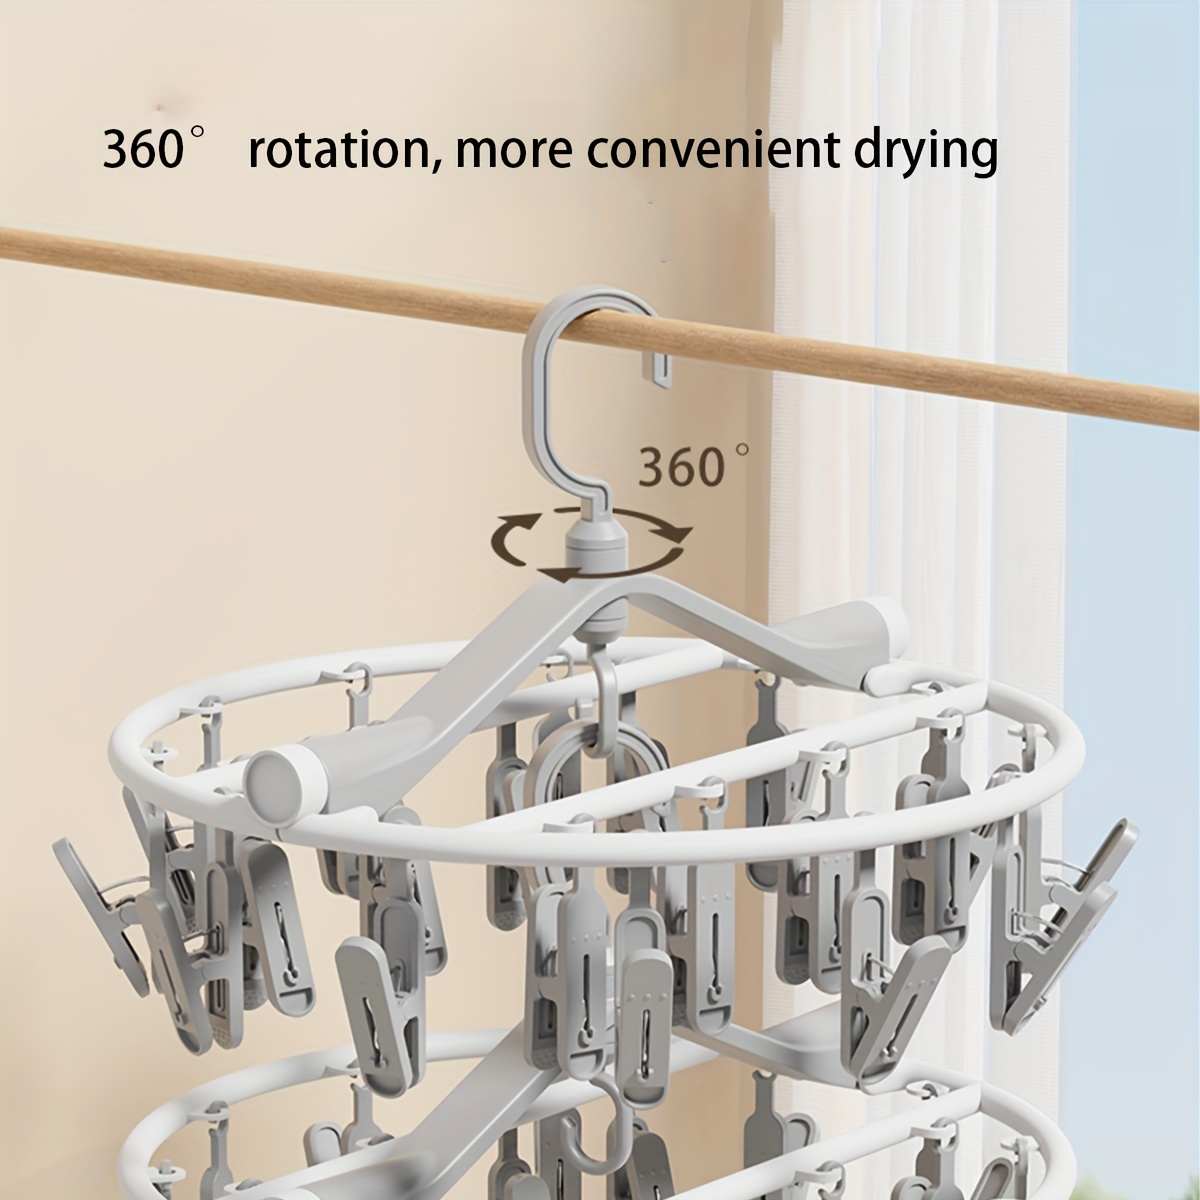 Organization and Storage Gnobogi Windproof Sock Clips Hanger, Clothes Drying Rack with 360 Swivel Hook and Strong Clips for Drying and Organize